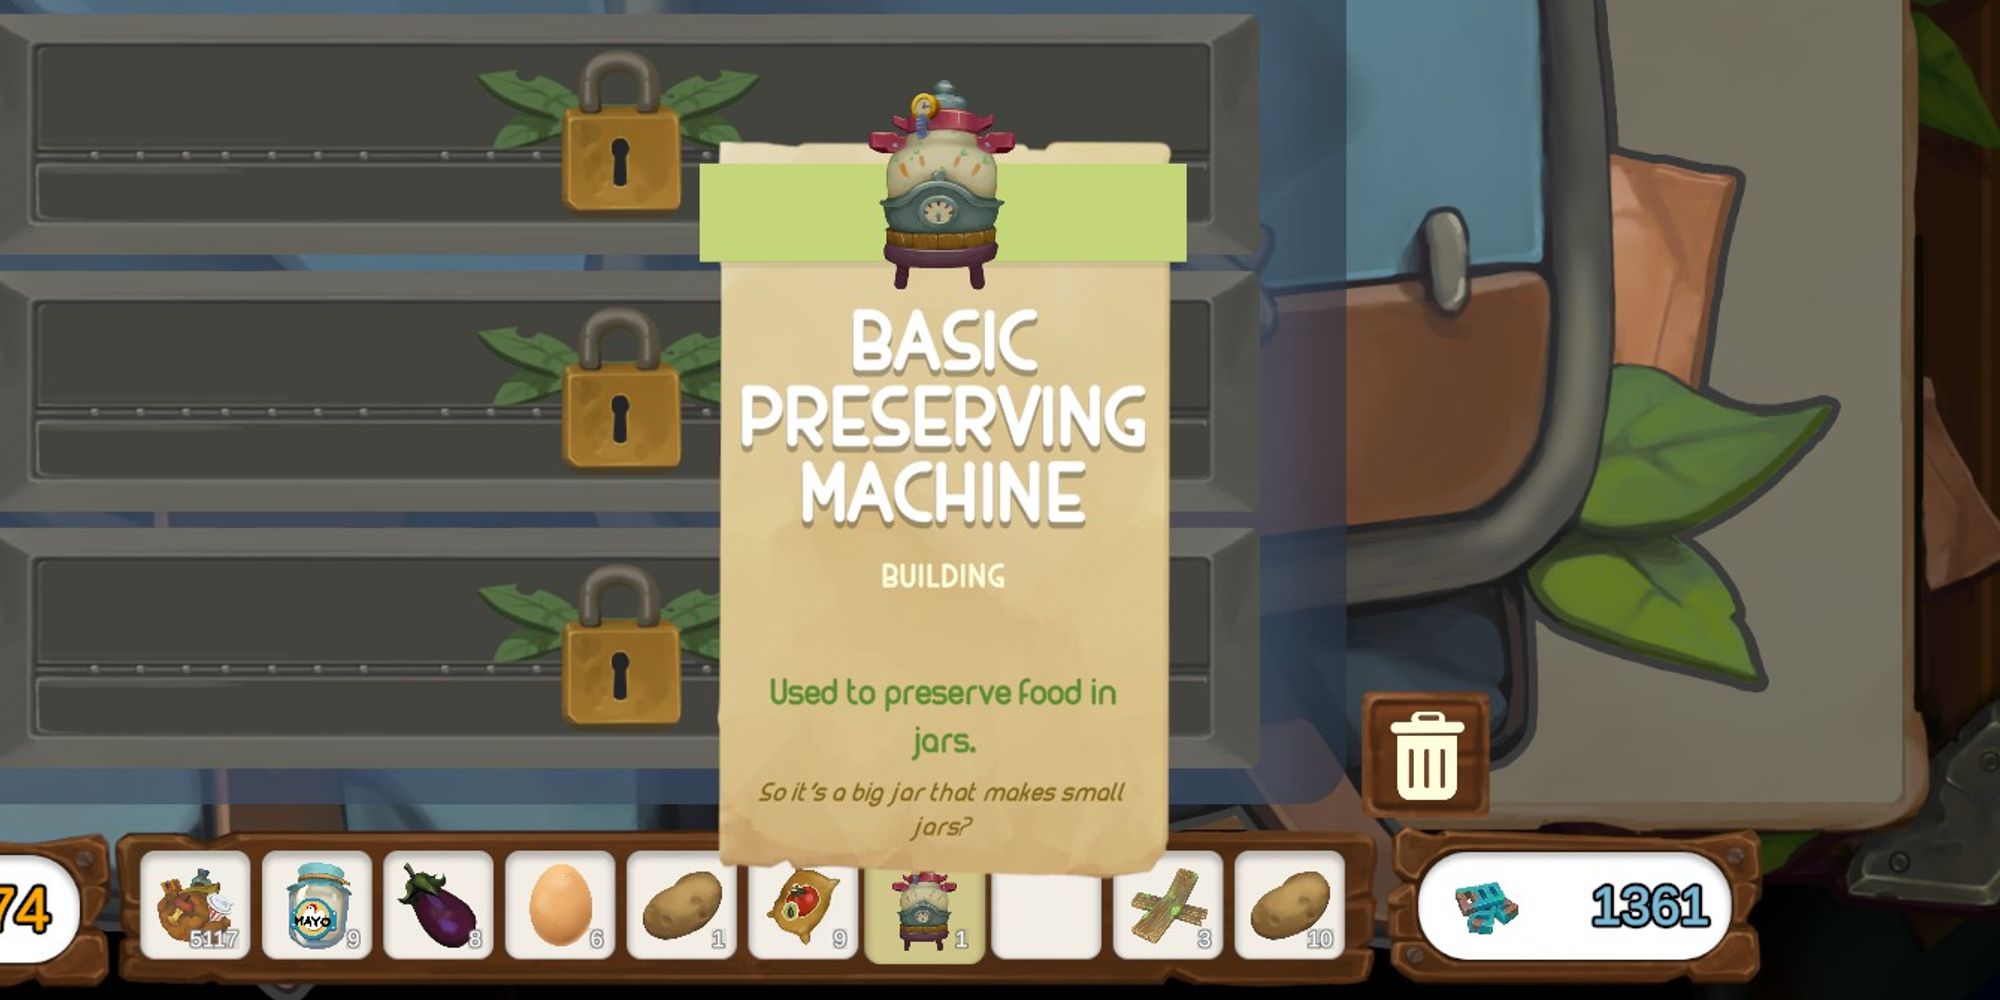 player inventory screen with basic preserving machine highlighted